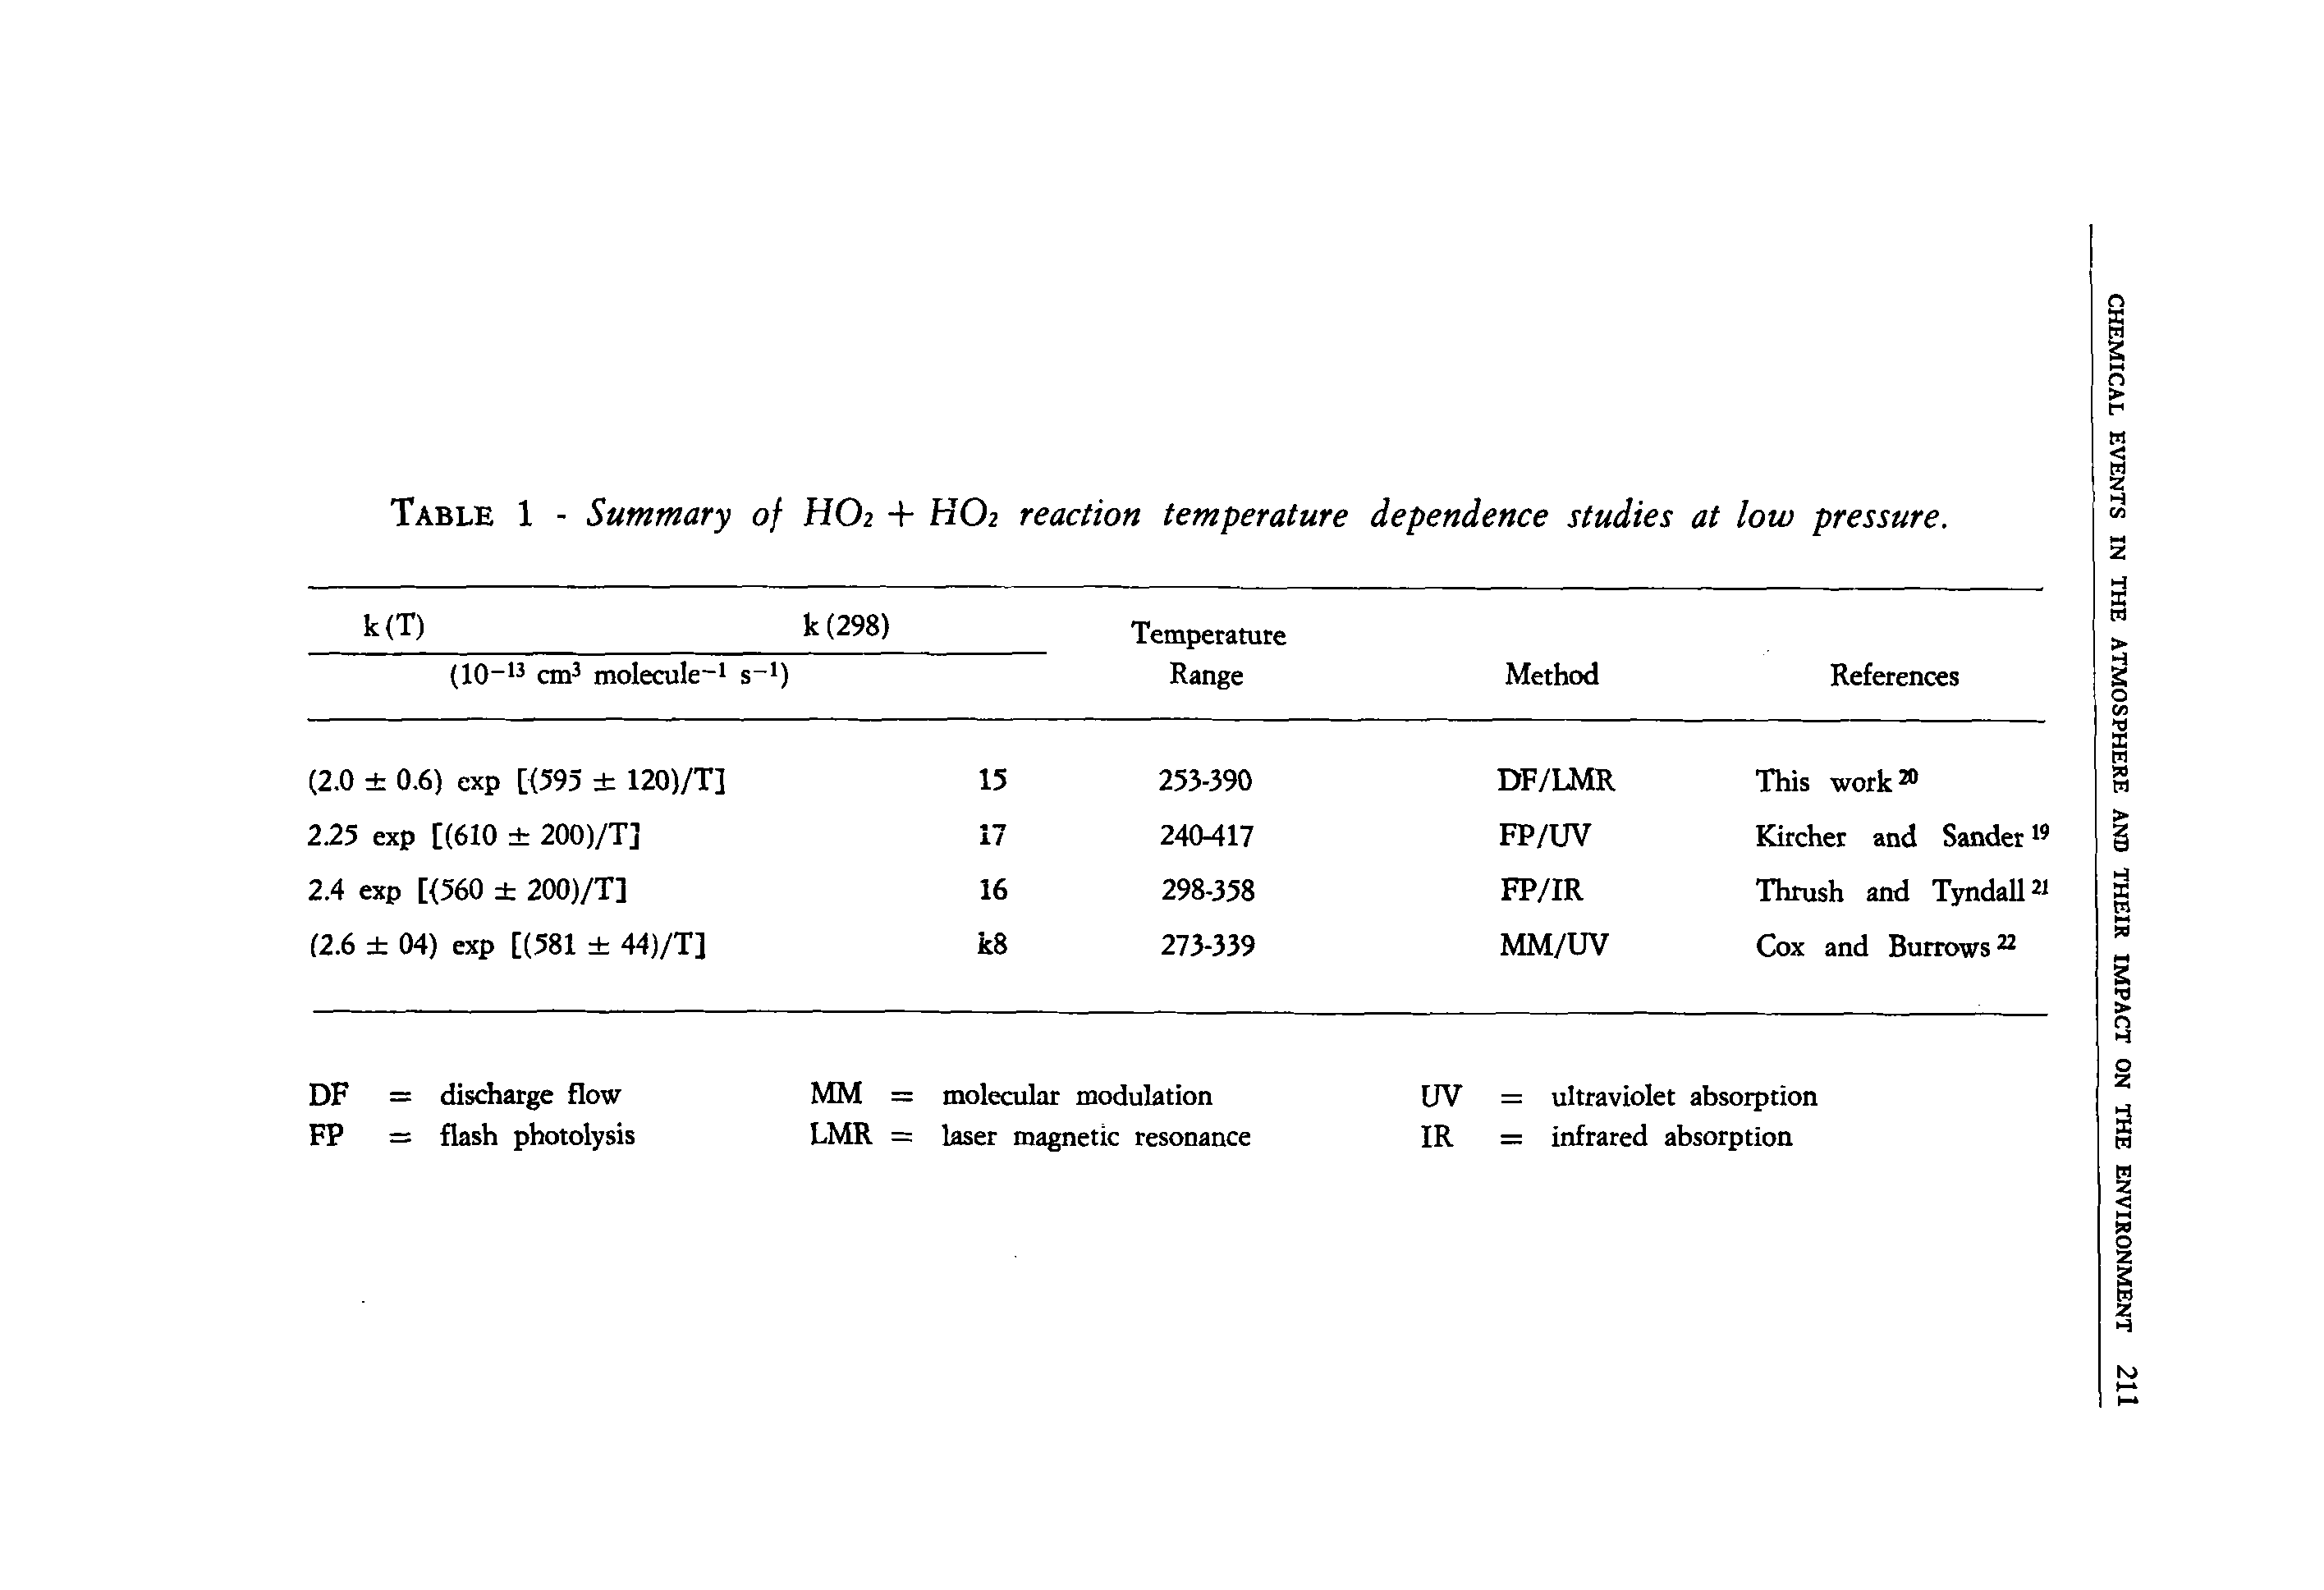 Table 1 - Summary of HO2 + HO2 reaction temperature dependence studies at low pressure.